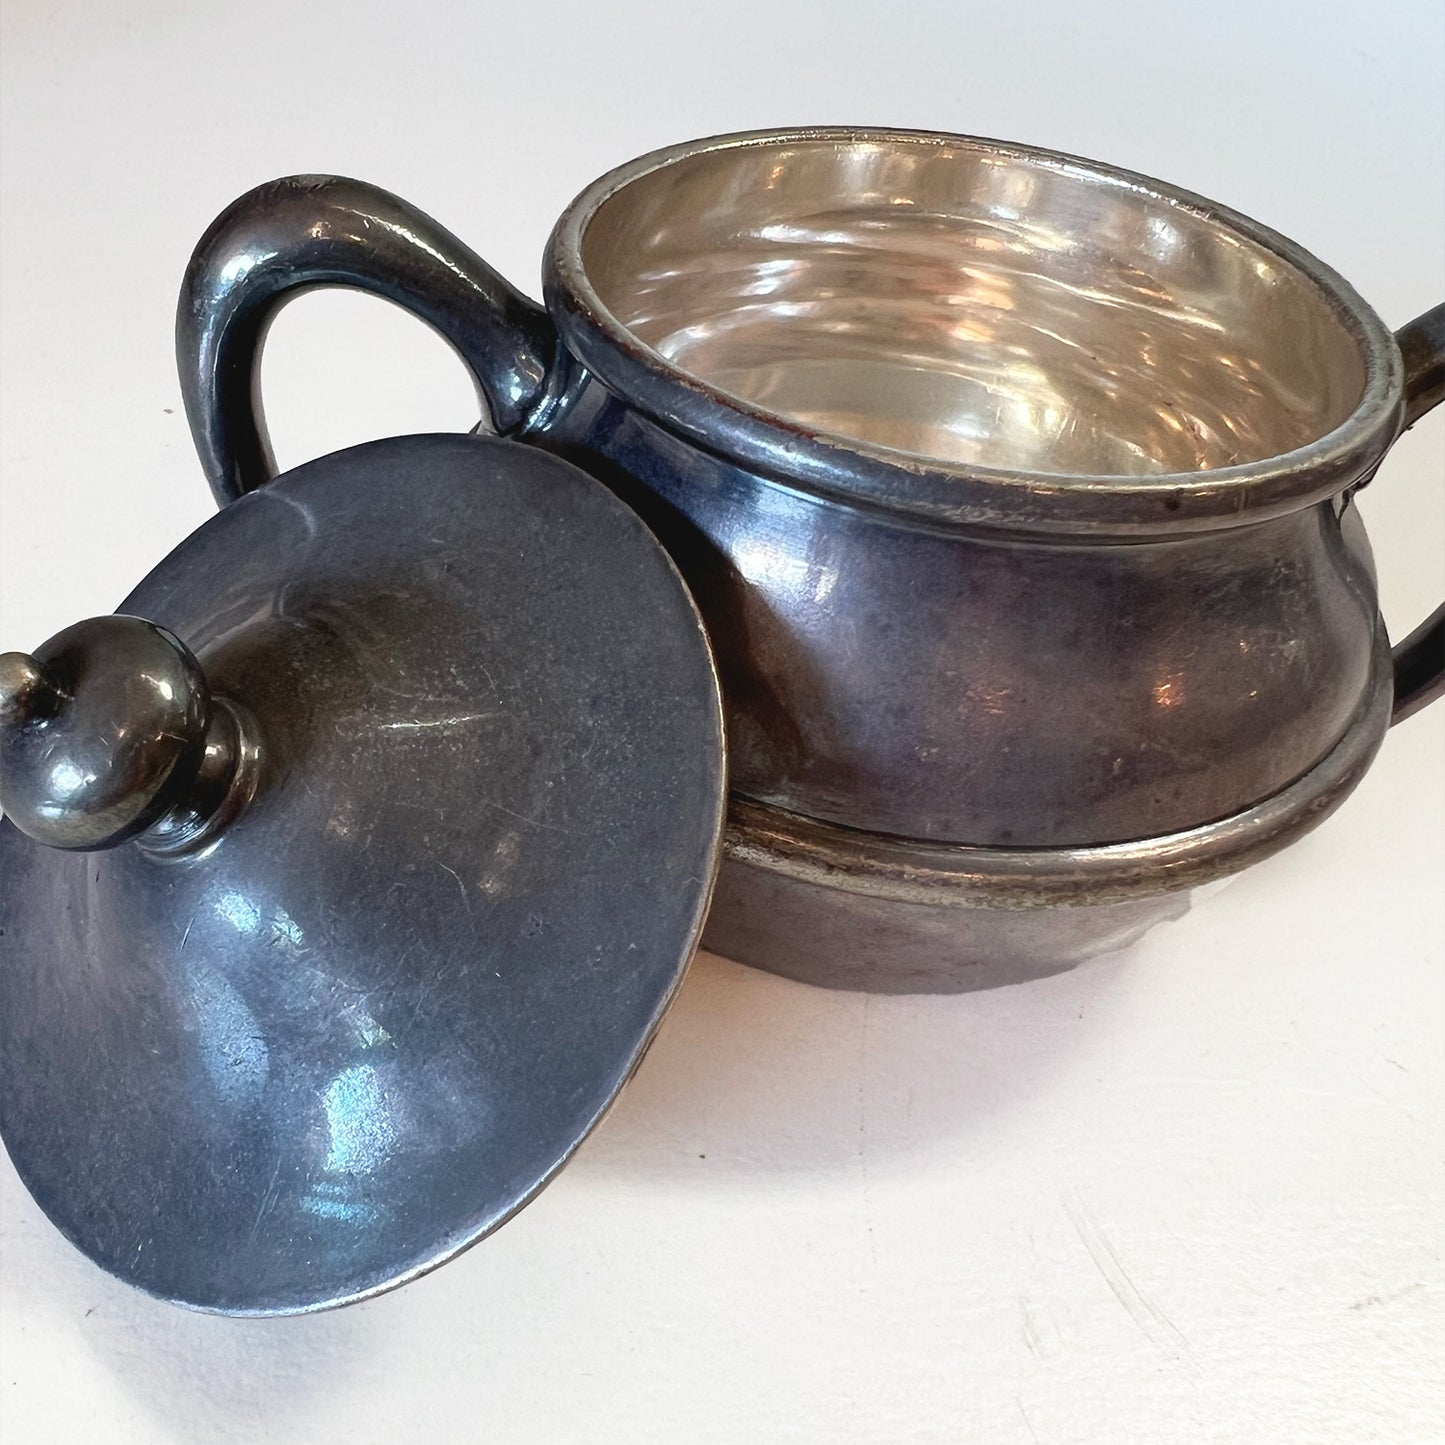 Silver soldered sugar bowl with lid, displayed in a 3/4 view with the lid off, revealing the shiny, bright silver inner surface of the bowl